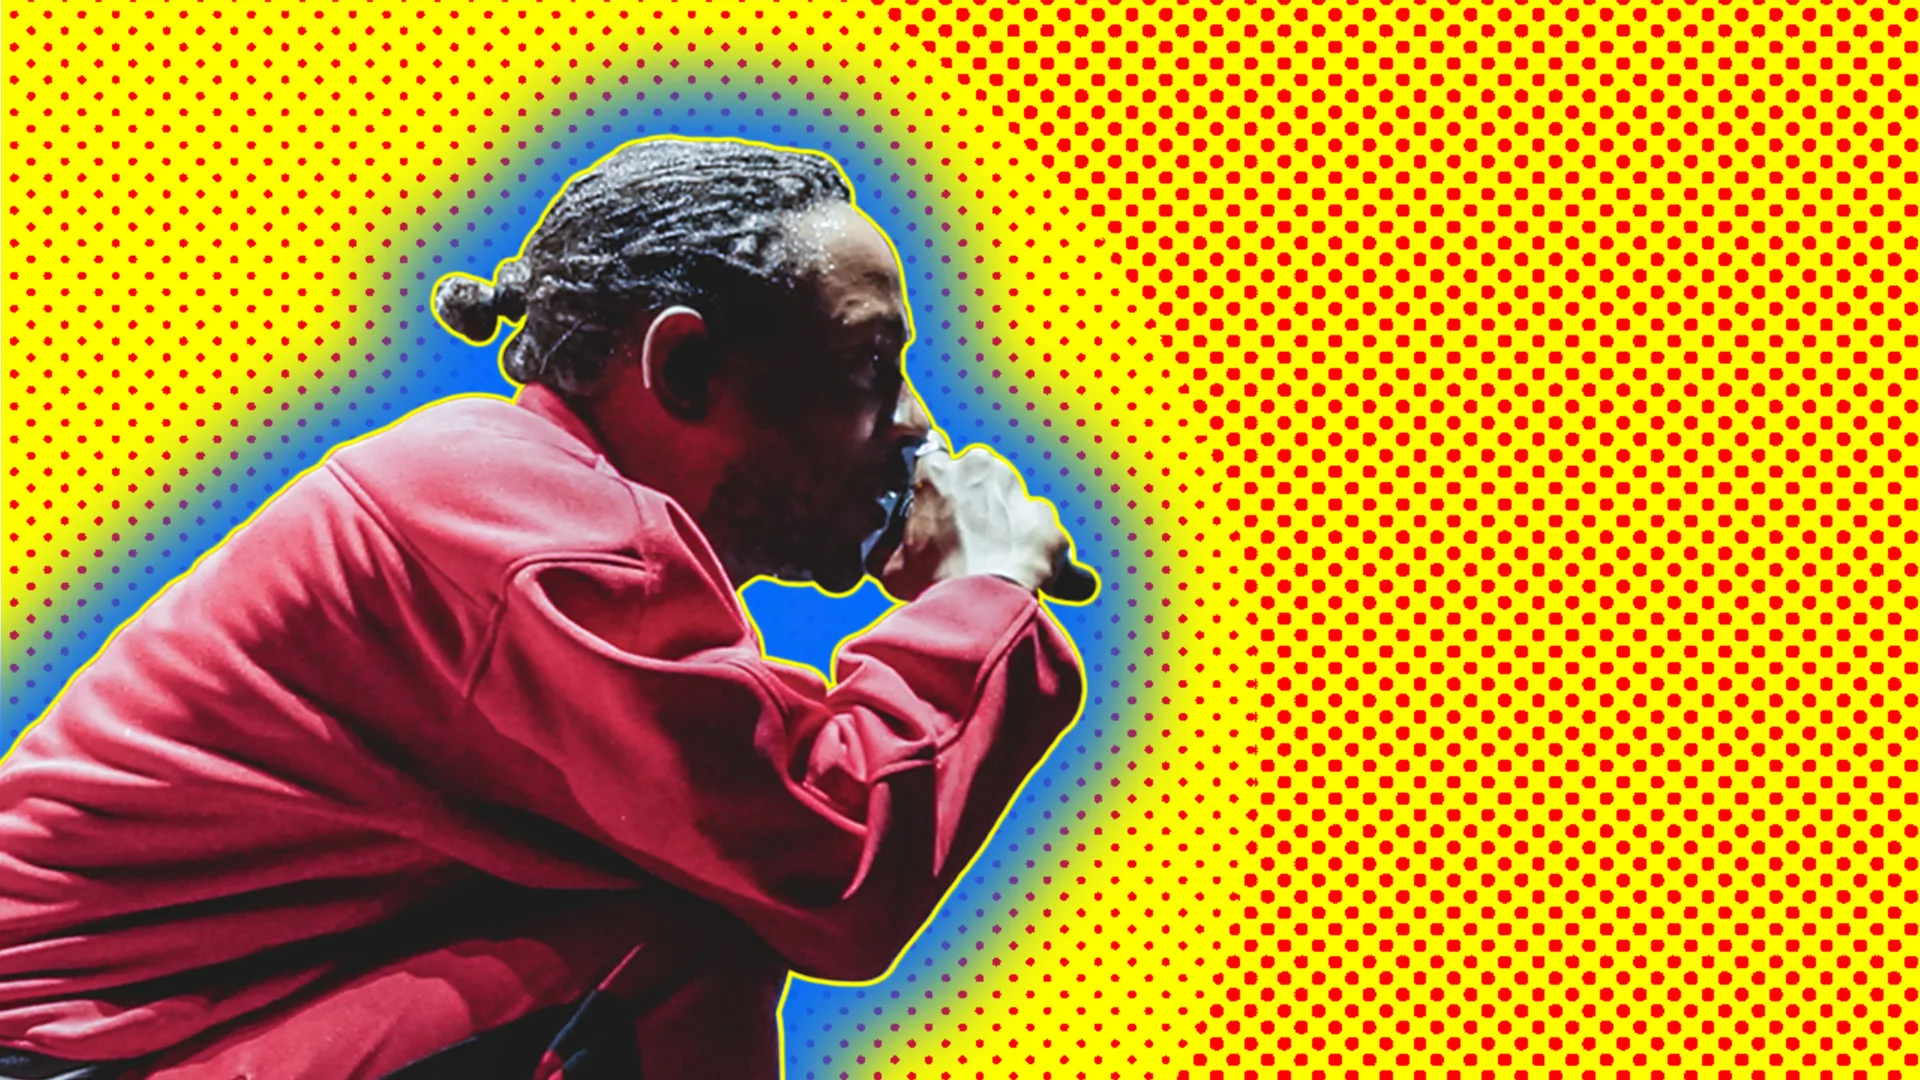 Kendrick Lamar singing live - in graphic house style